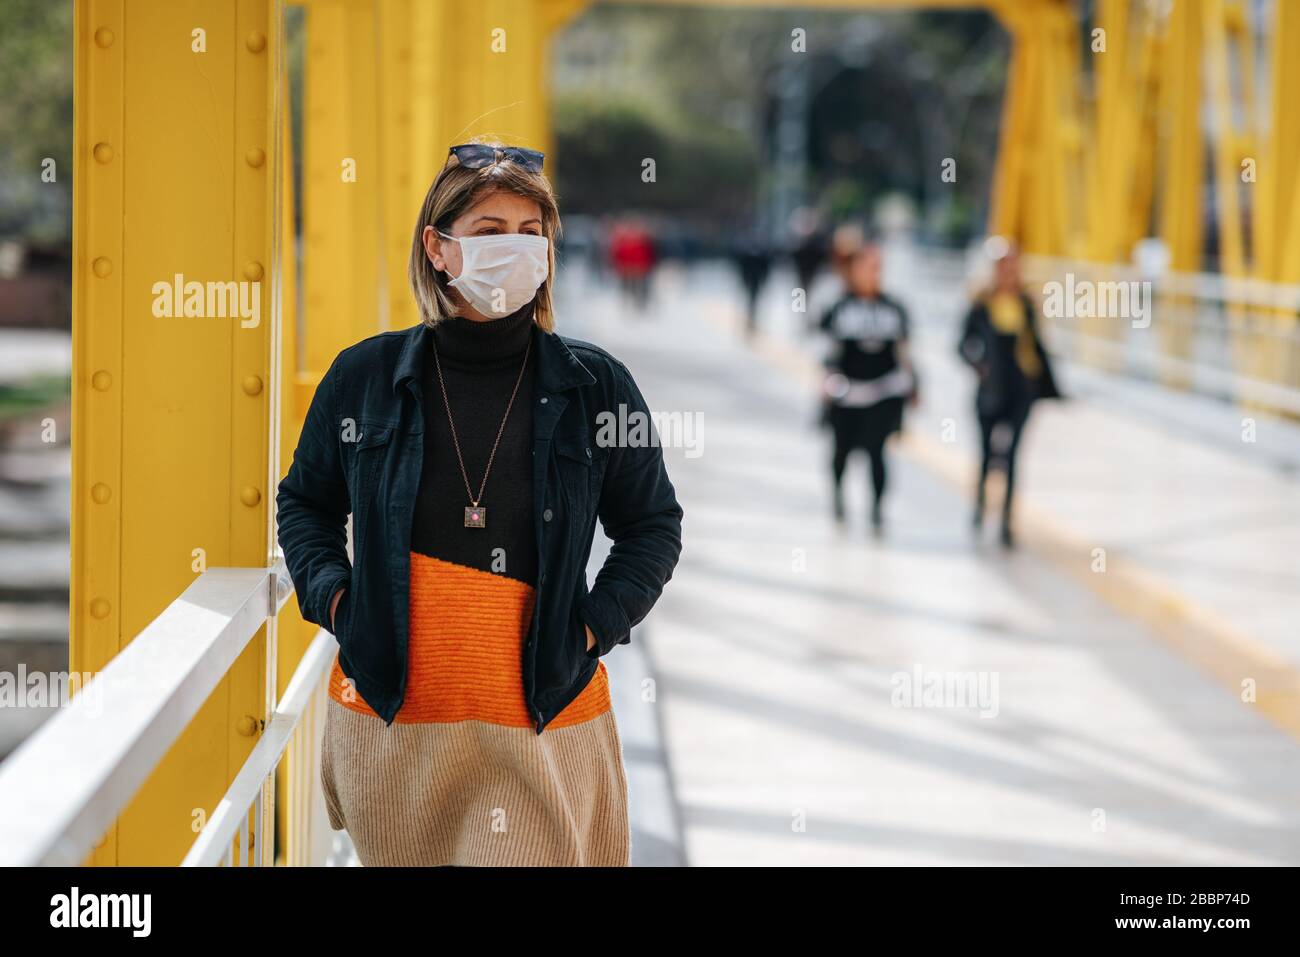 A reckless young Woman walk on crowded street with a mask in a quarantine period because of pandemic global danger Stock Photo